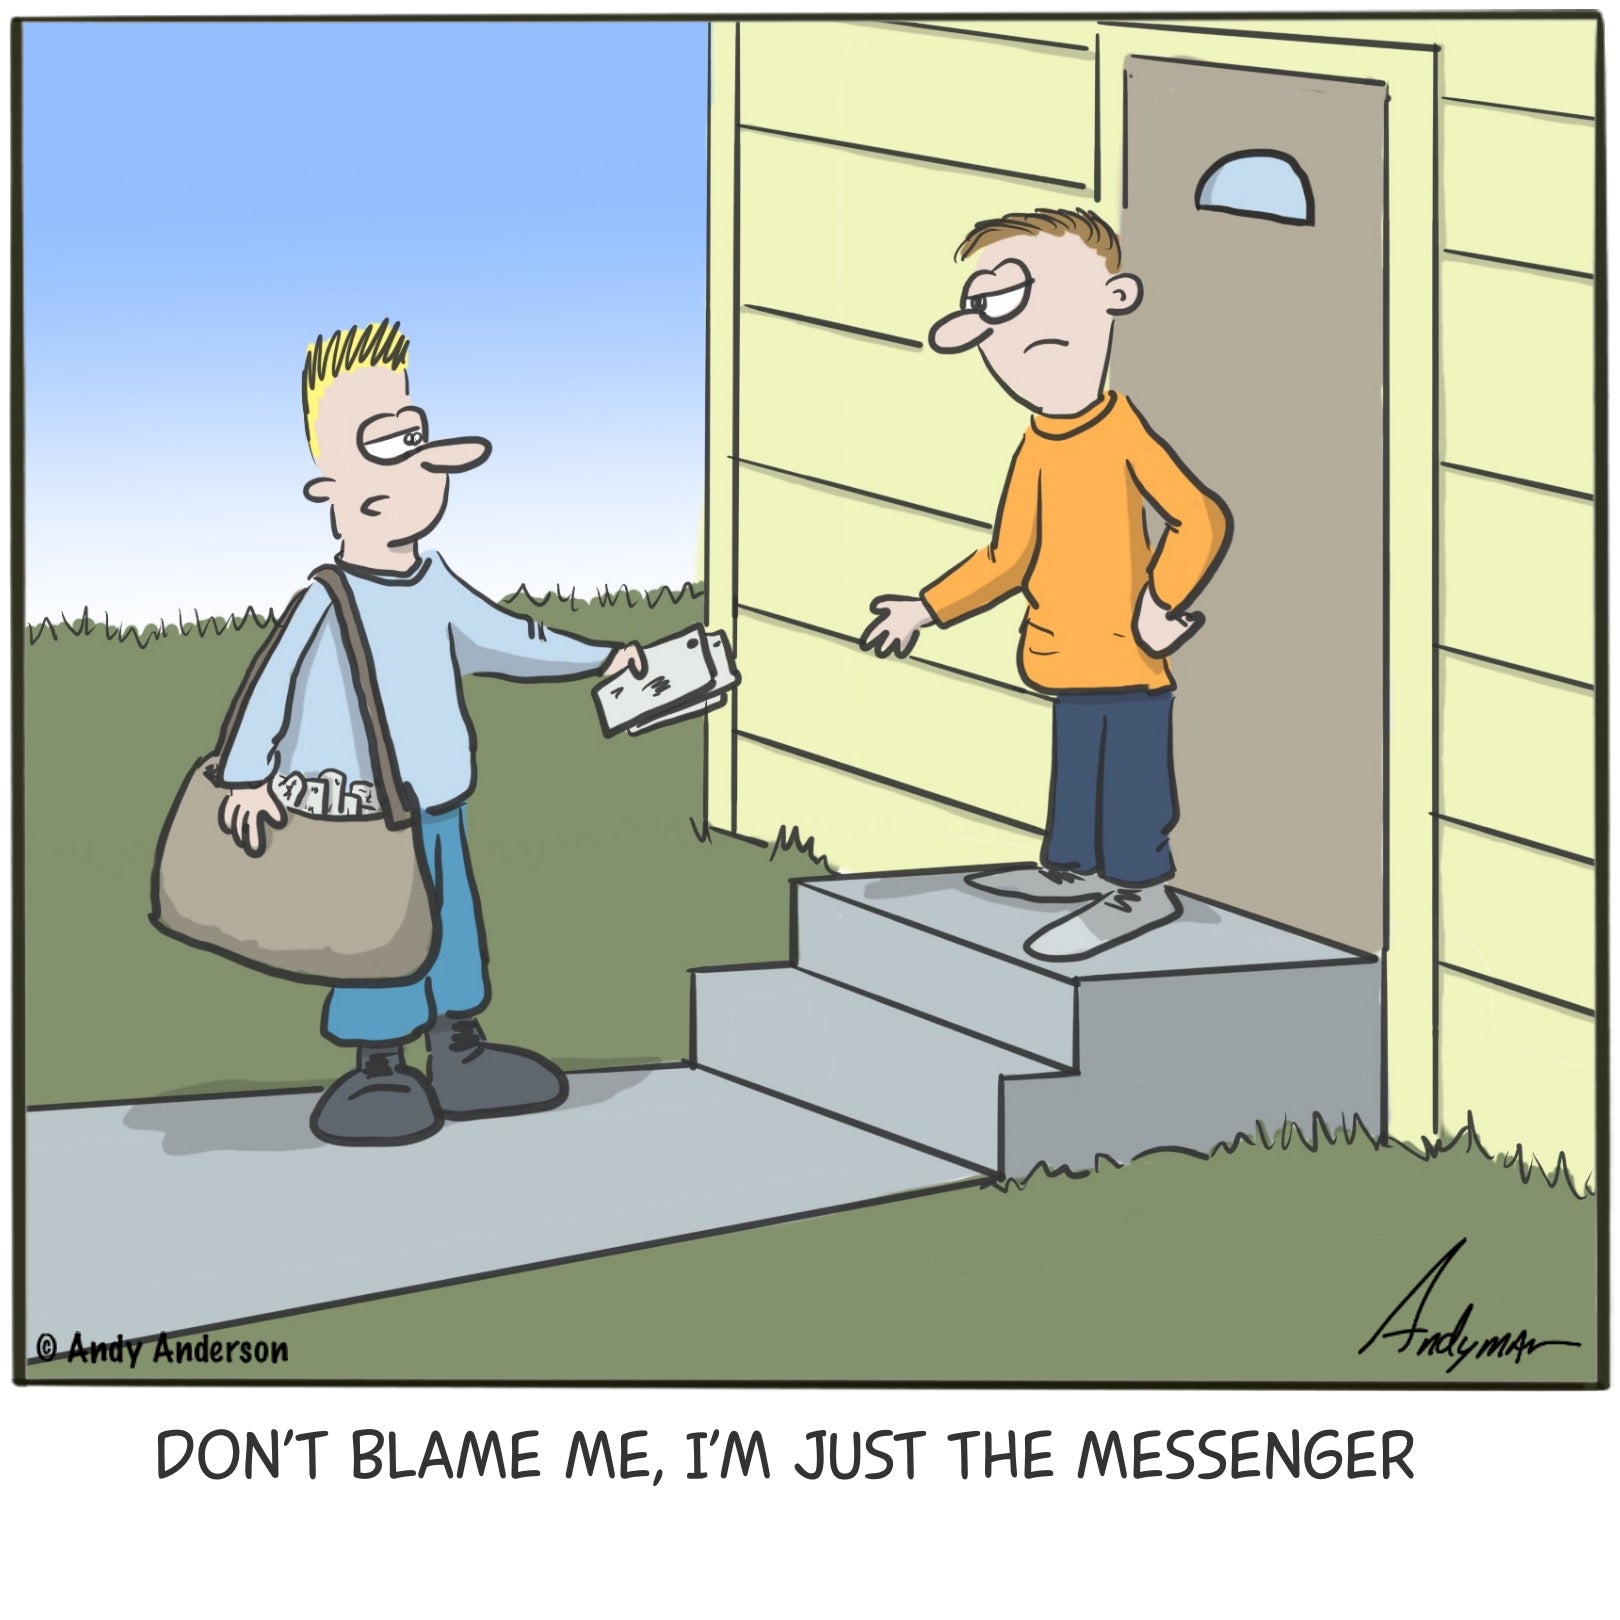 Cartoon about blaming the mailman for bad news